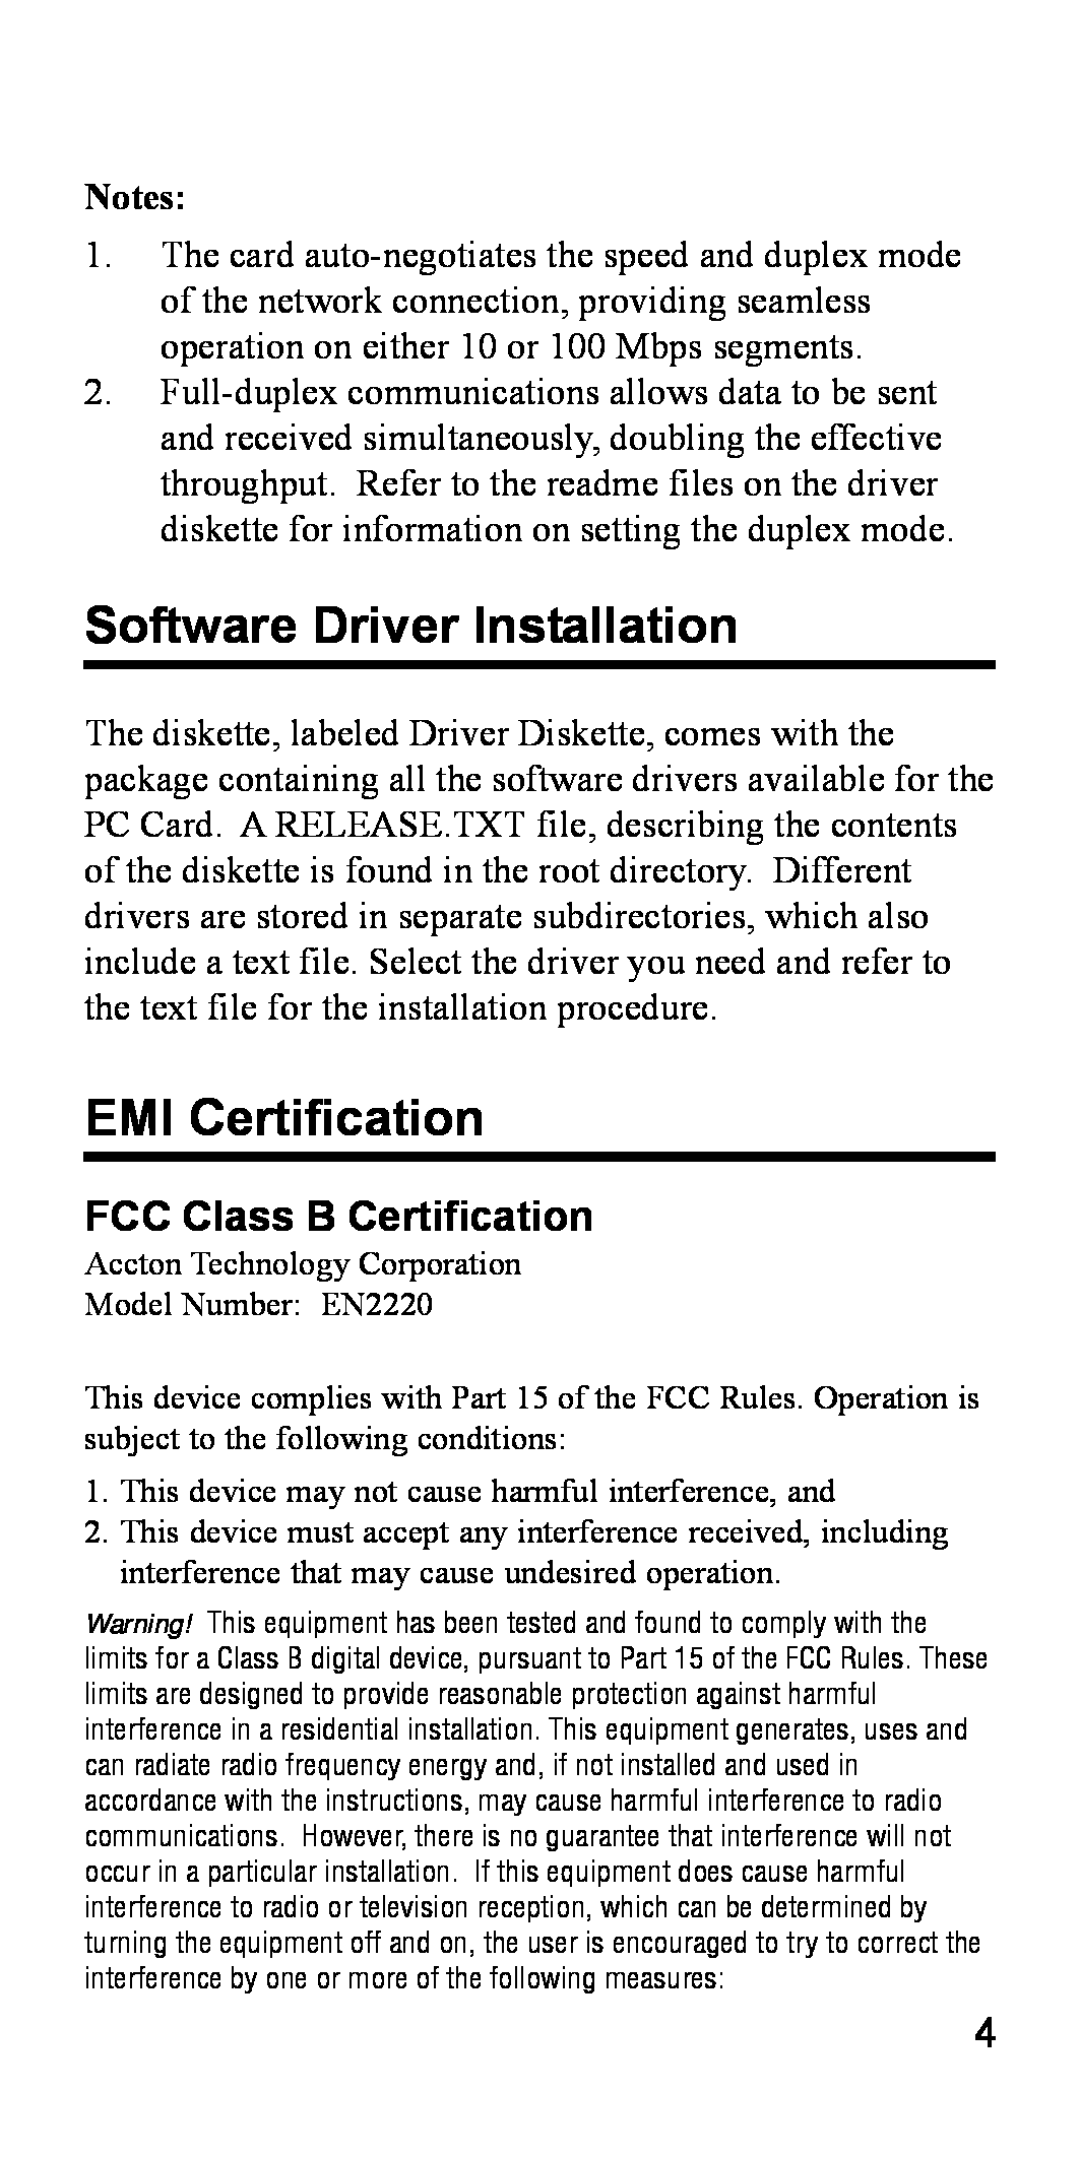 Accton Technology 32 specifications Software Driver Installation, EMI Certification, FCC Class B Certification 